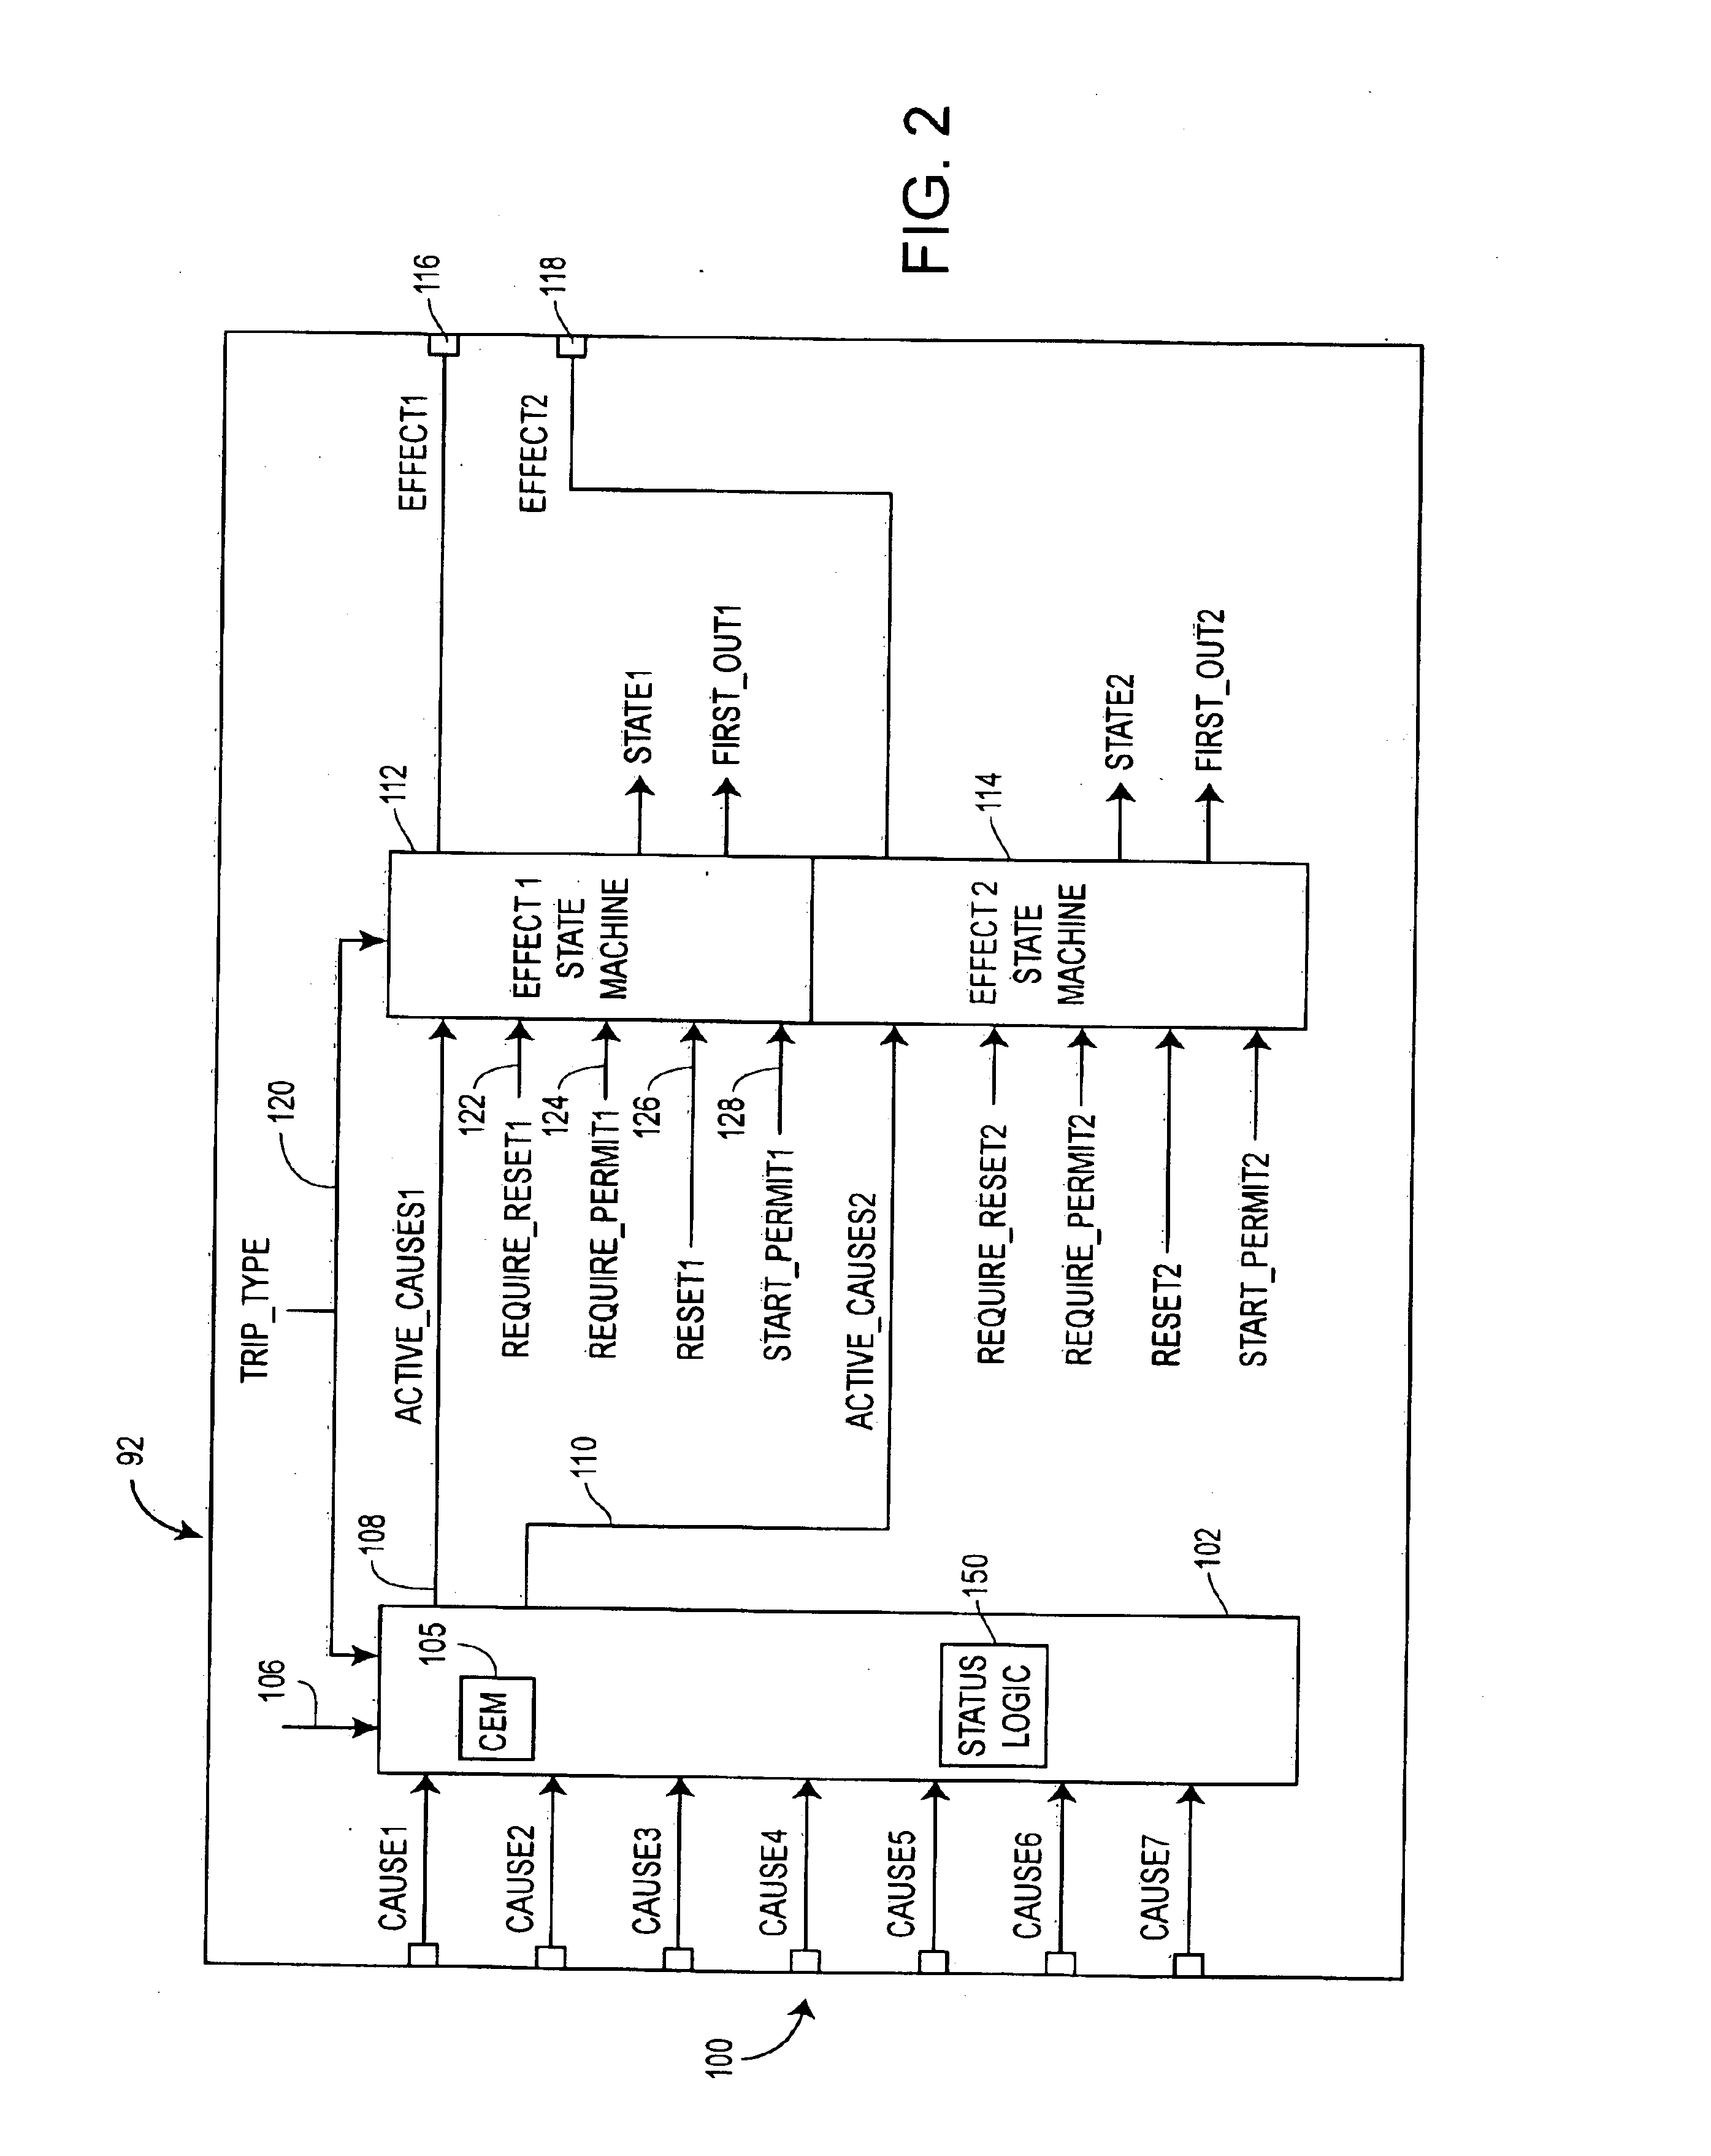 Function block implementation of a cause and effect matrix for use in a process safety system